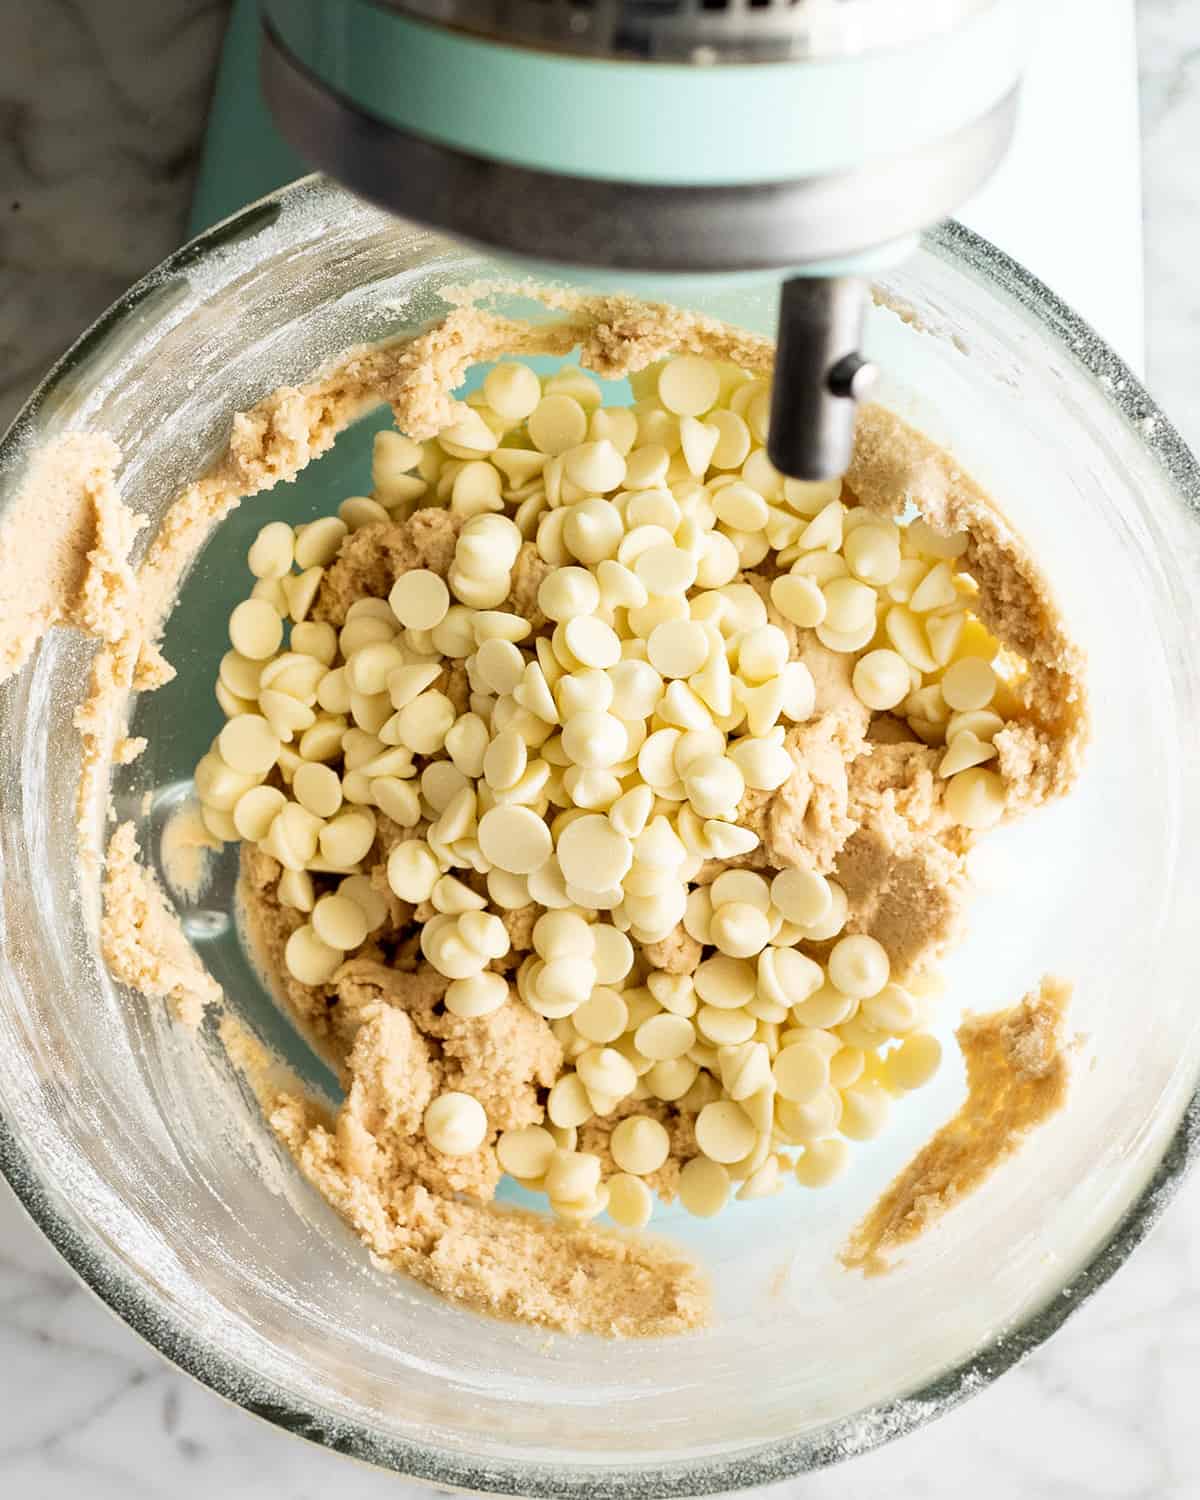 how to make White Chocolate Chip Cookies - adding white chocolate chips to the dough